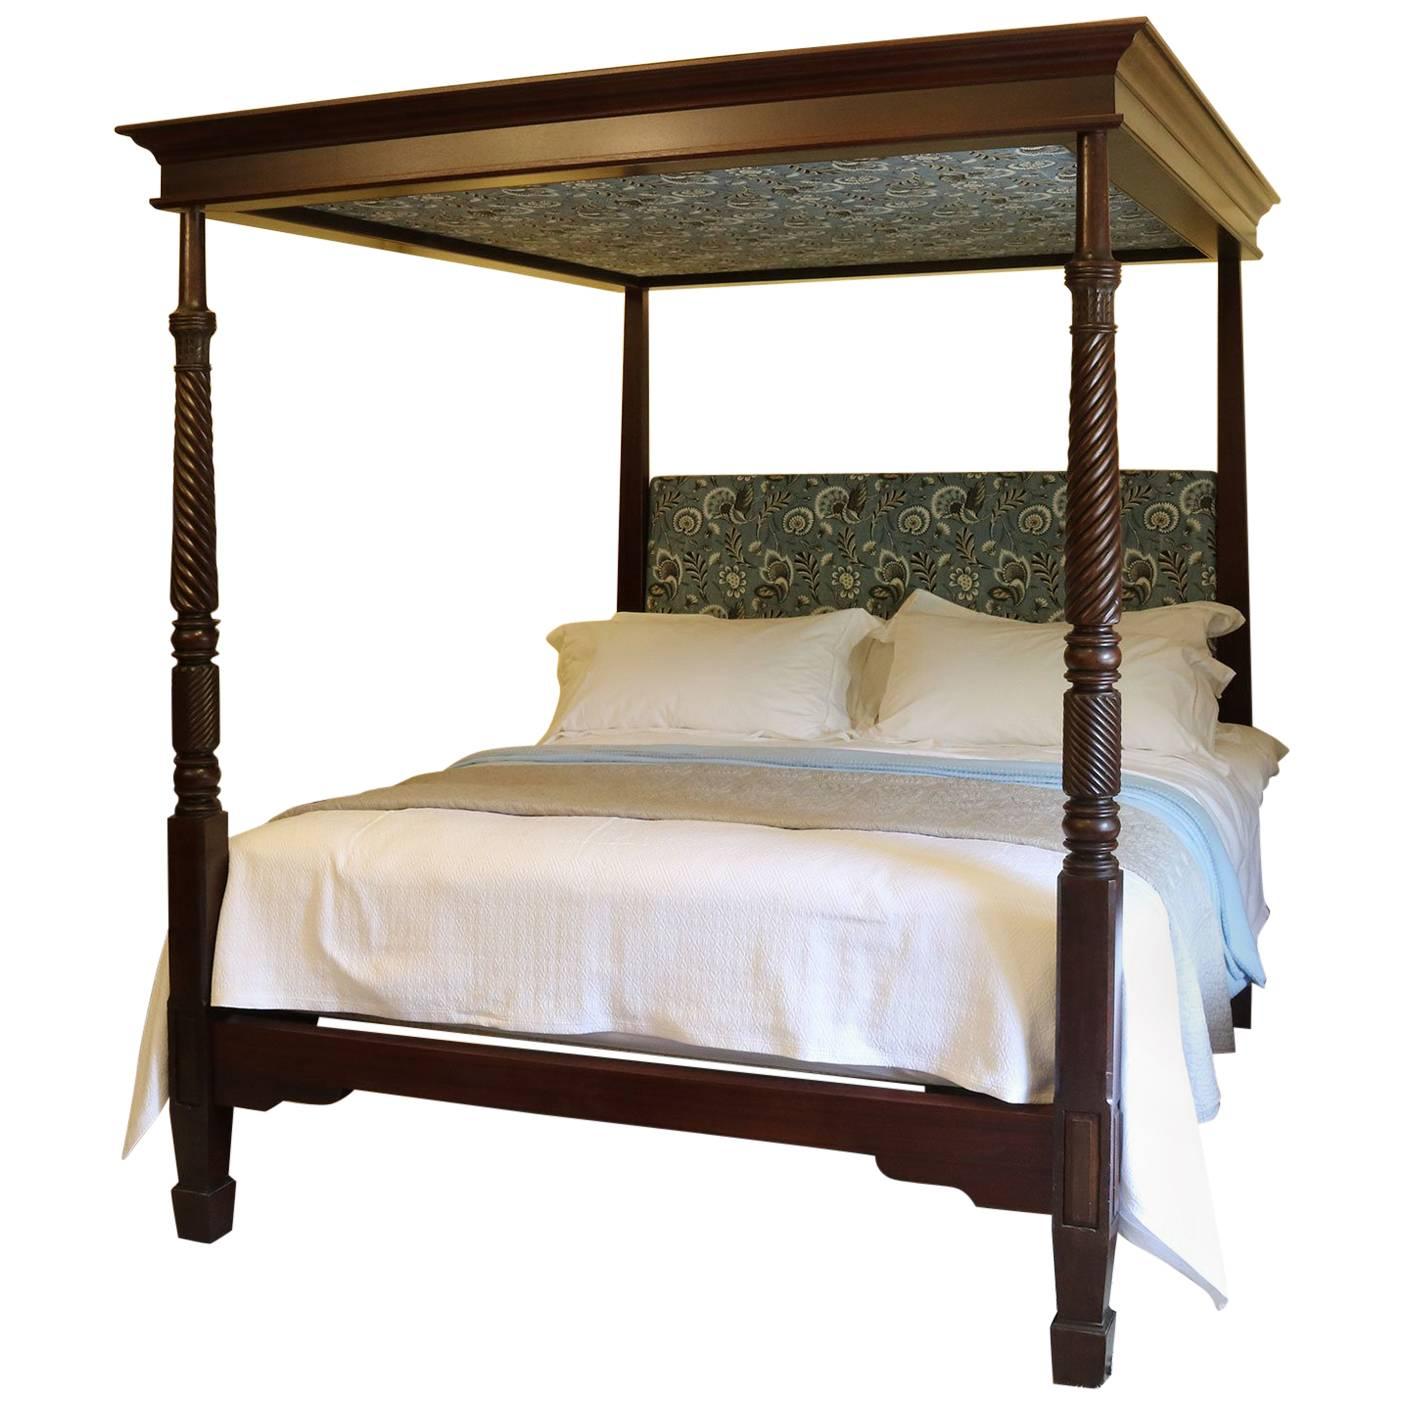 Reconstructed Wooden Four Poster Bed - KYLE 21213